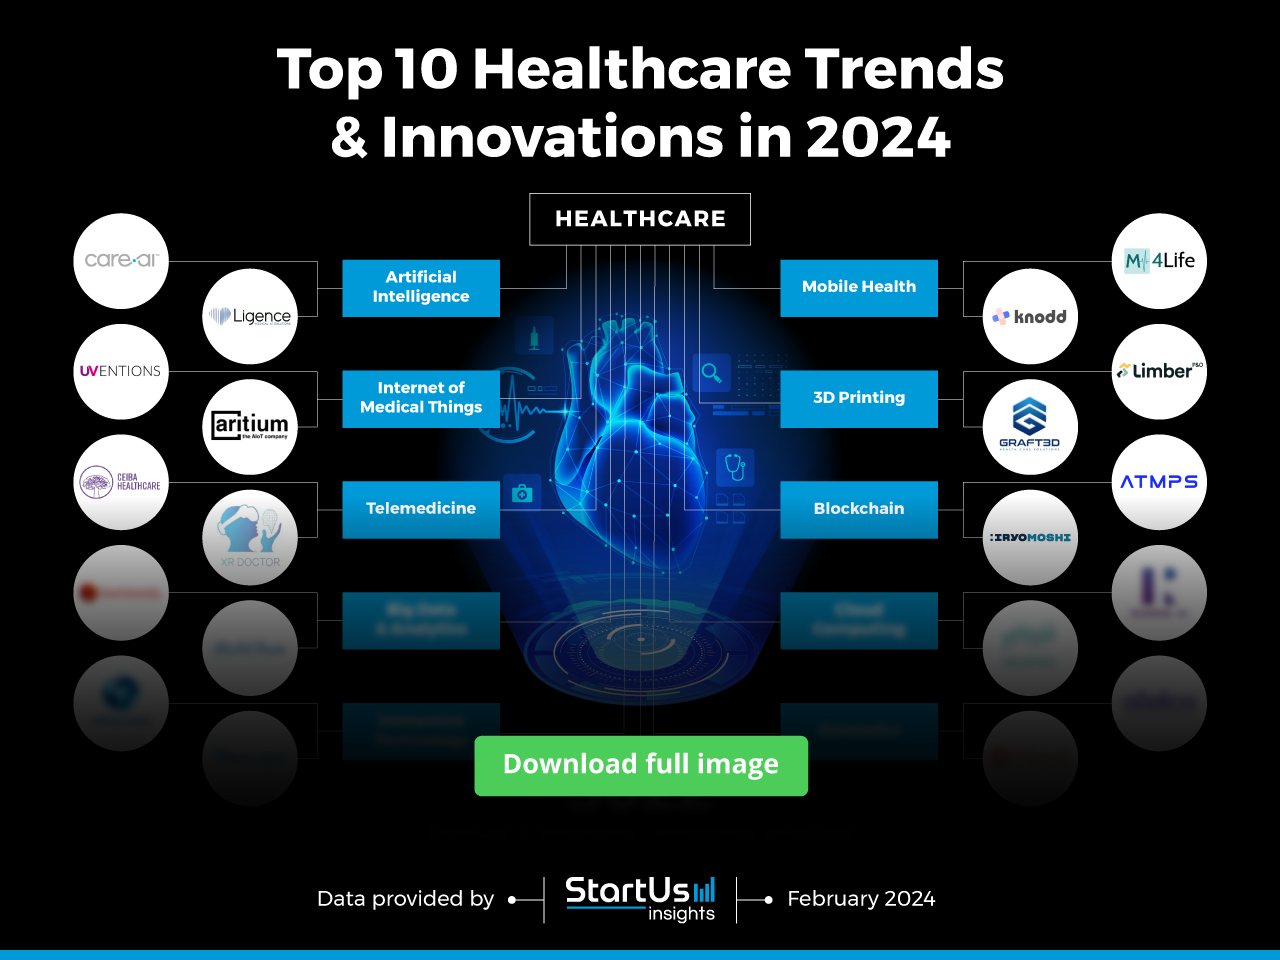 Healthcare-Trends-InnovationMap-Blurred-StartUs-Insights-noresize